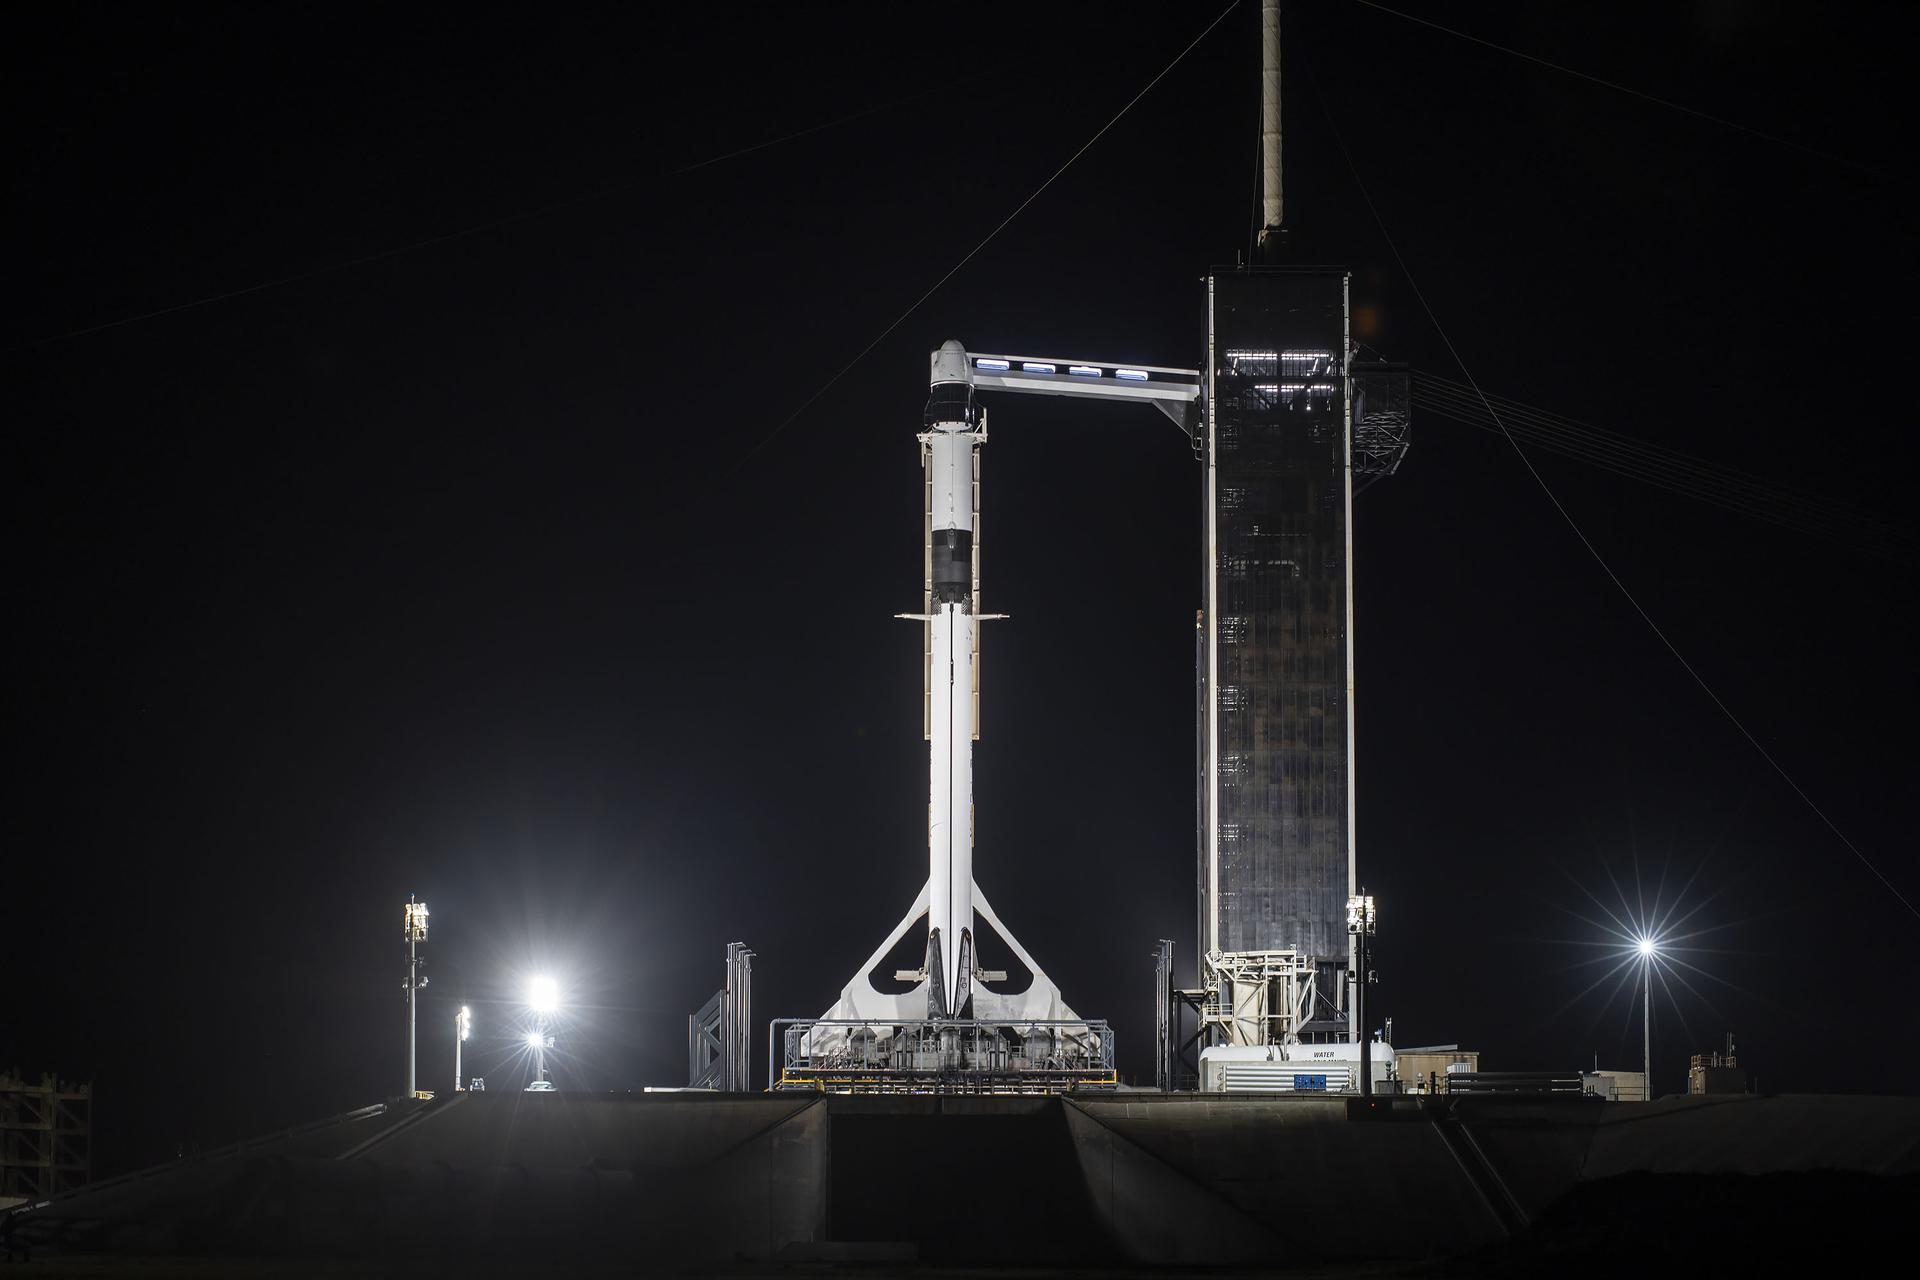 NASA's SpaceX 22nd commercial resupply services mission